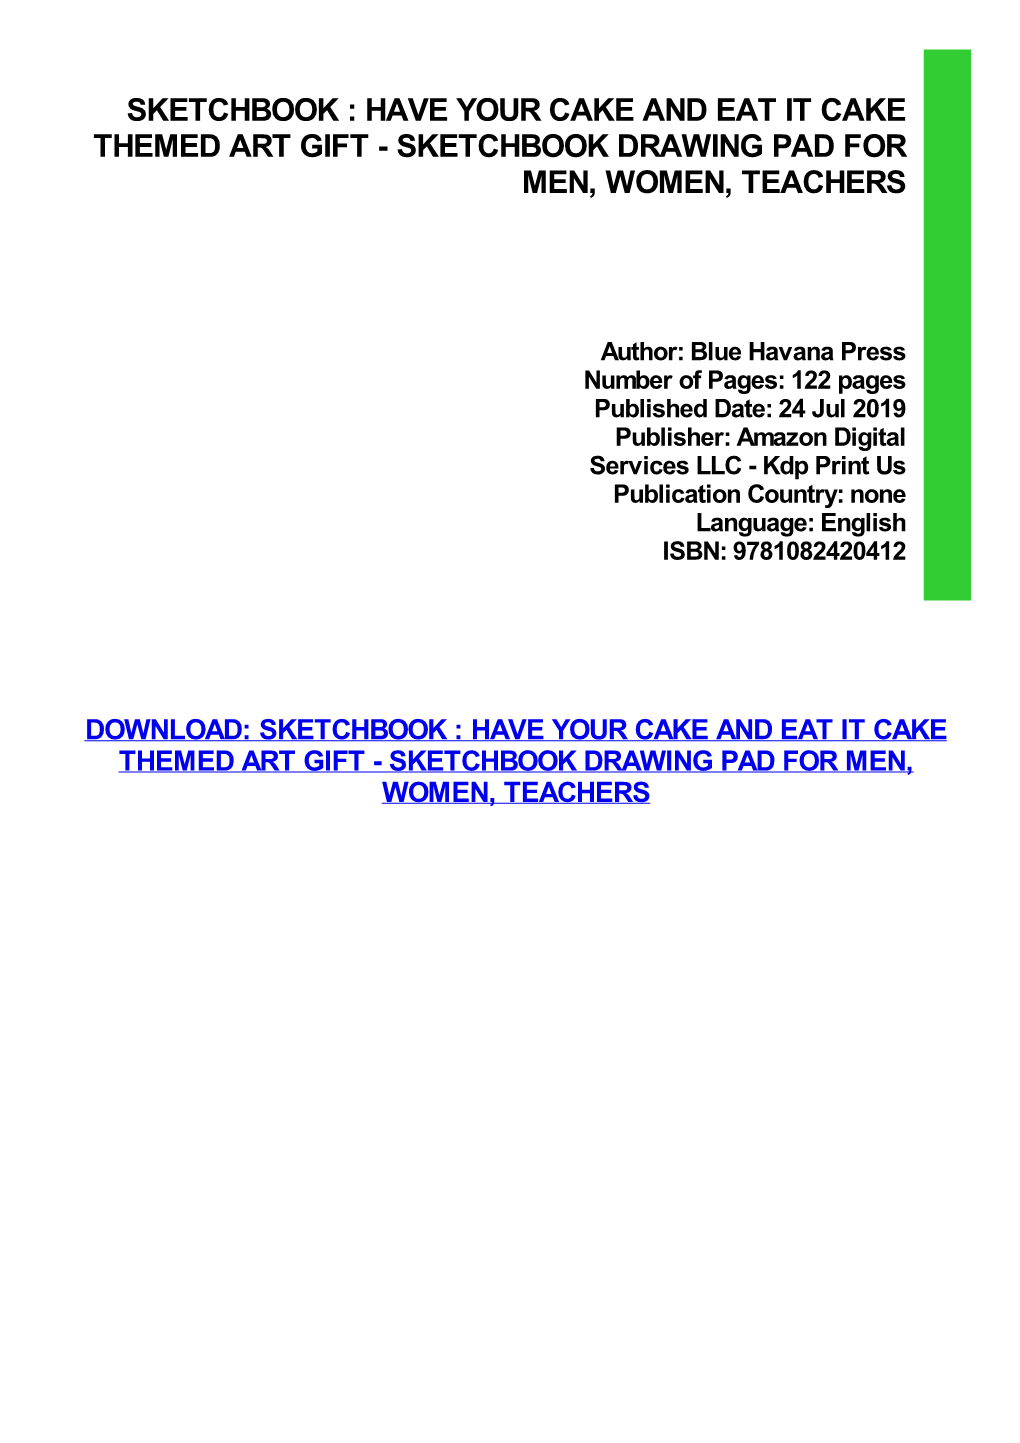 Have Your Cake and Eat It Cake Themed Art Gift - Sketchbook Drawing Pad for Men, Women, Teachers